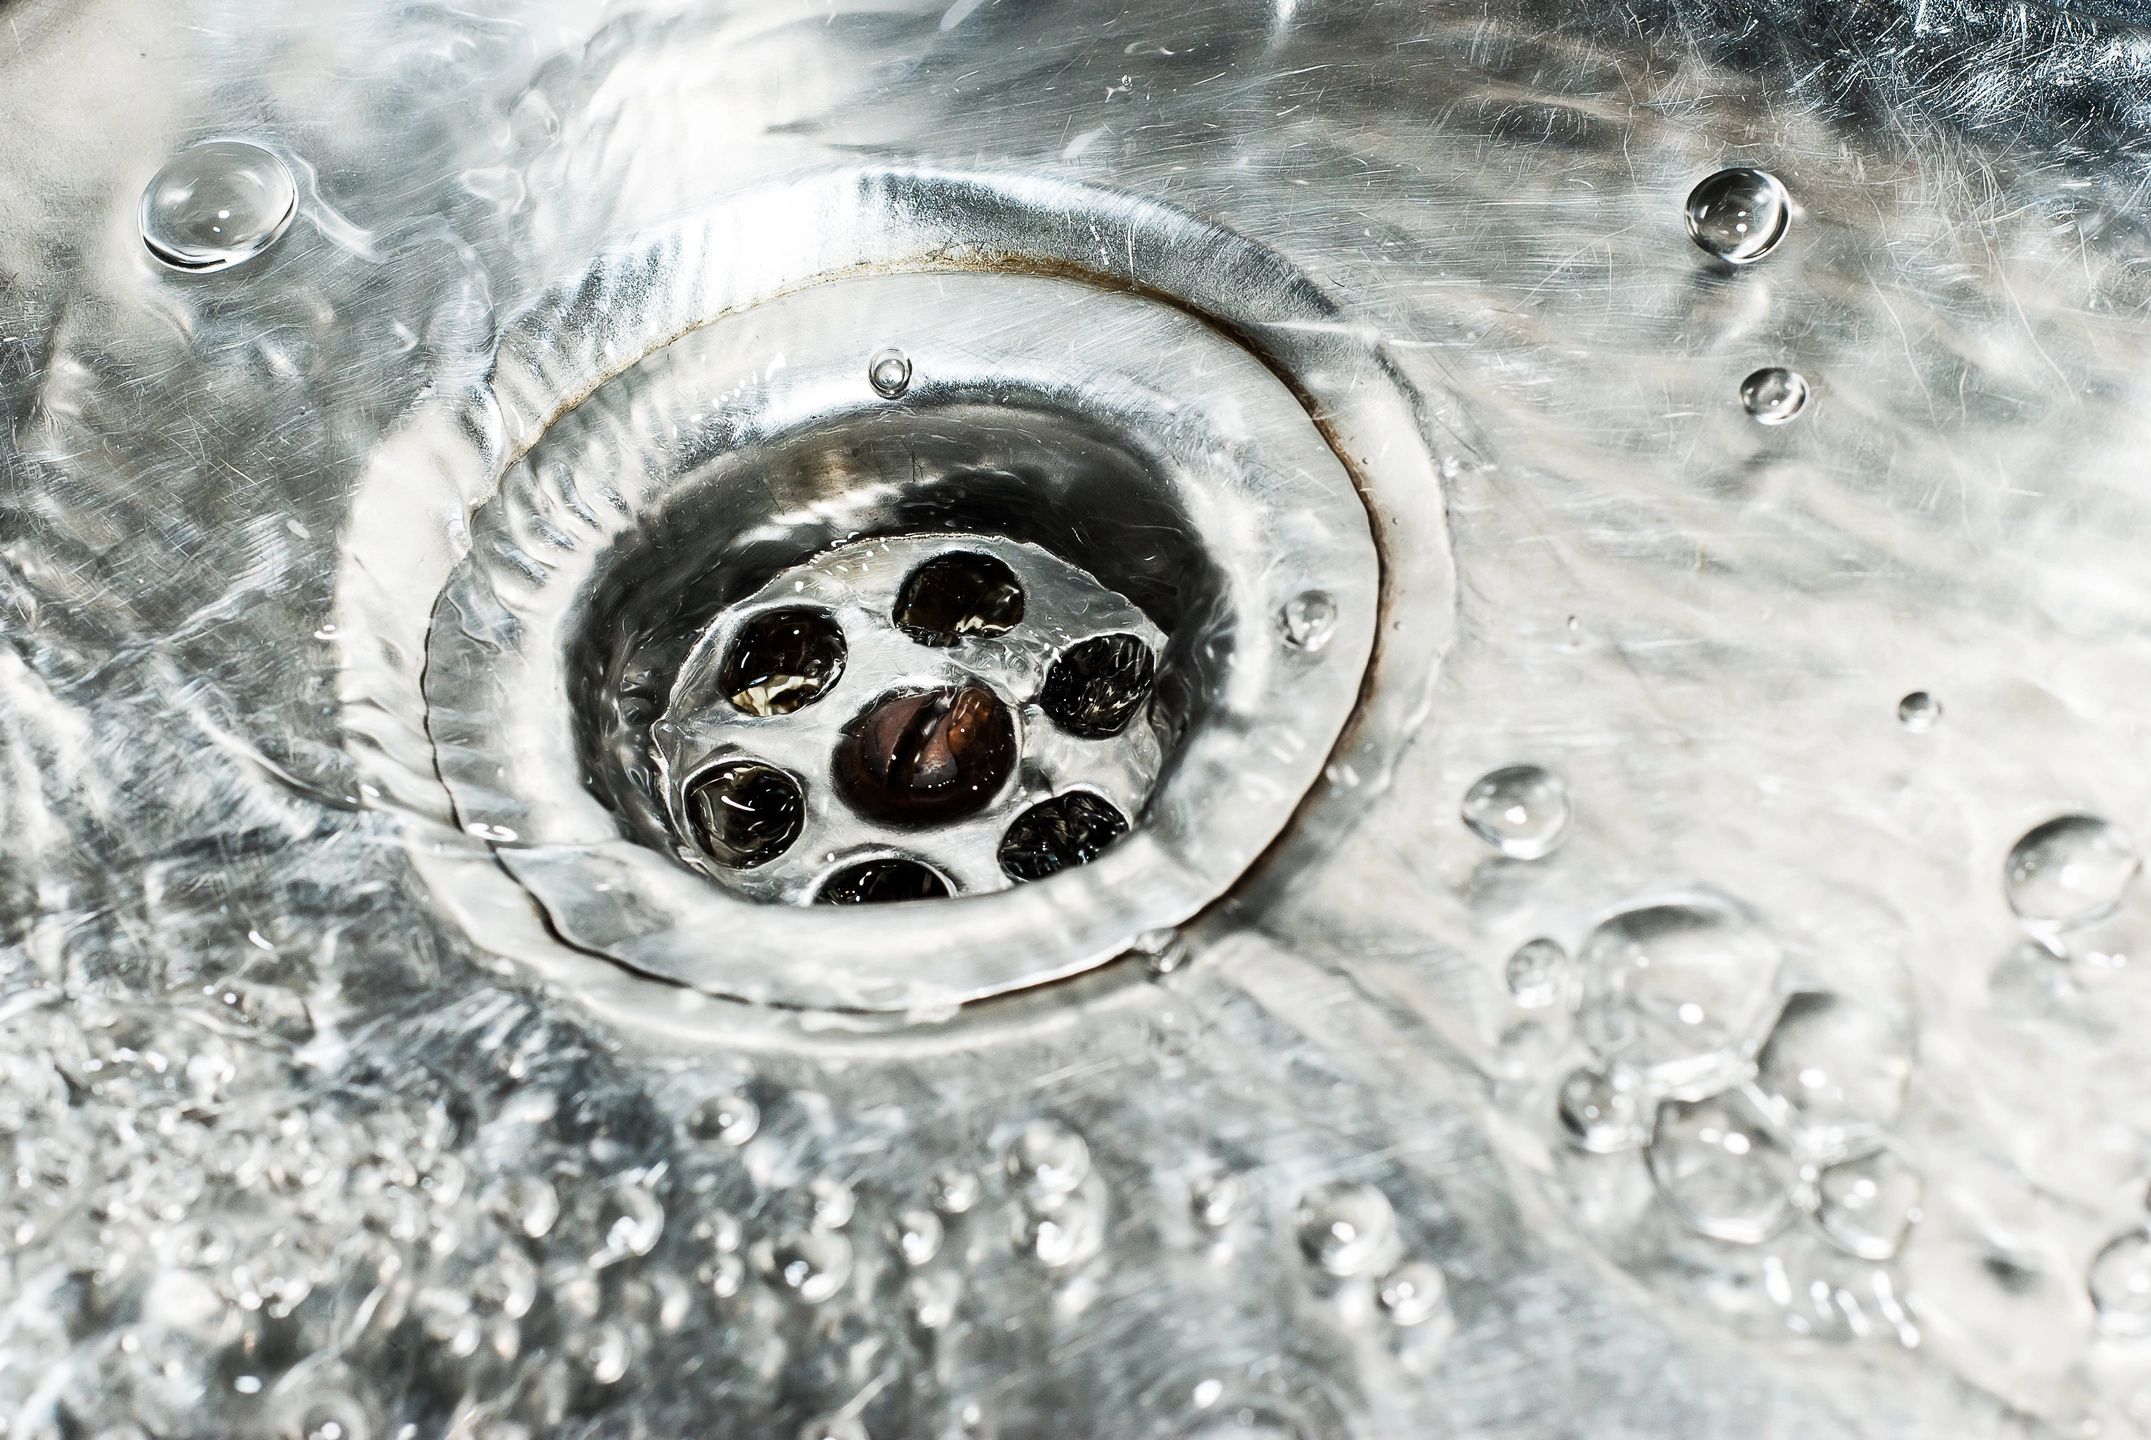 Clear water in a stainless steel sink